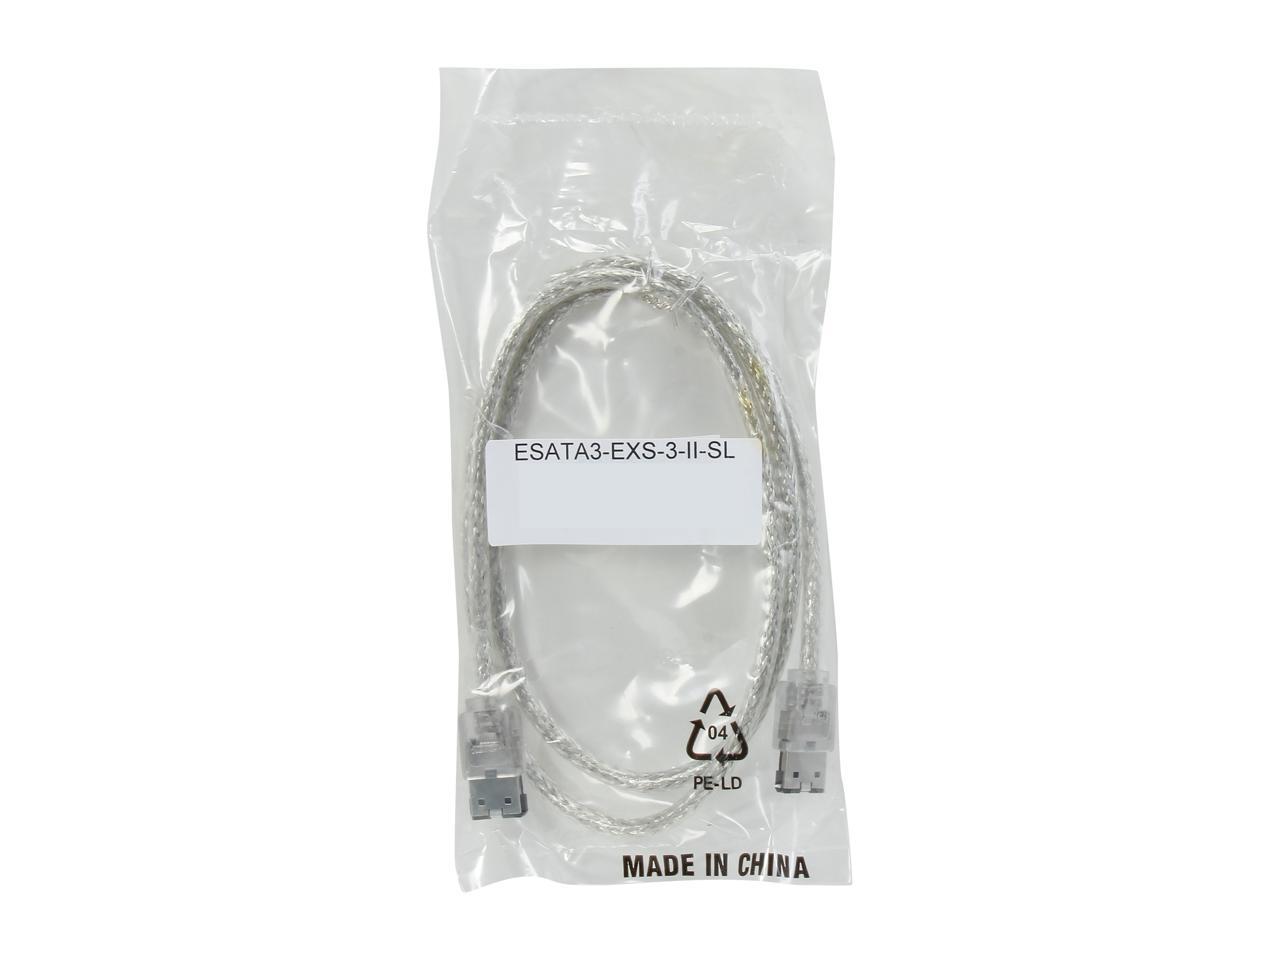 Nippon Labs ESATA3-EXS-3-llSL 3 ft. eSATA III(Type I) Male to Male Cable, Silver - image 3 of 3